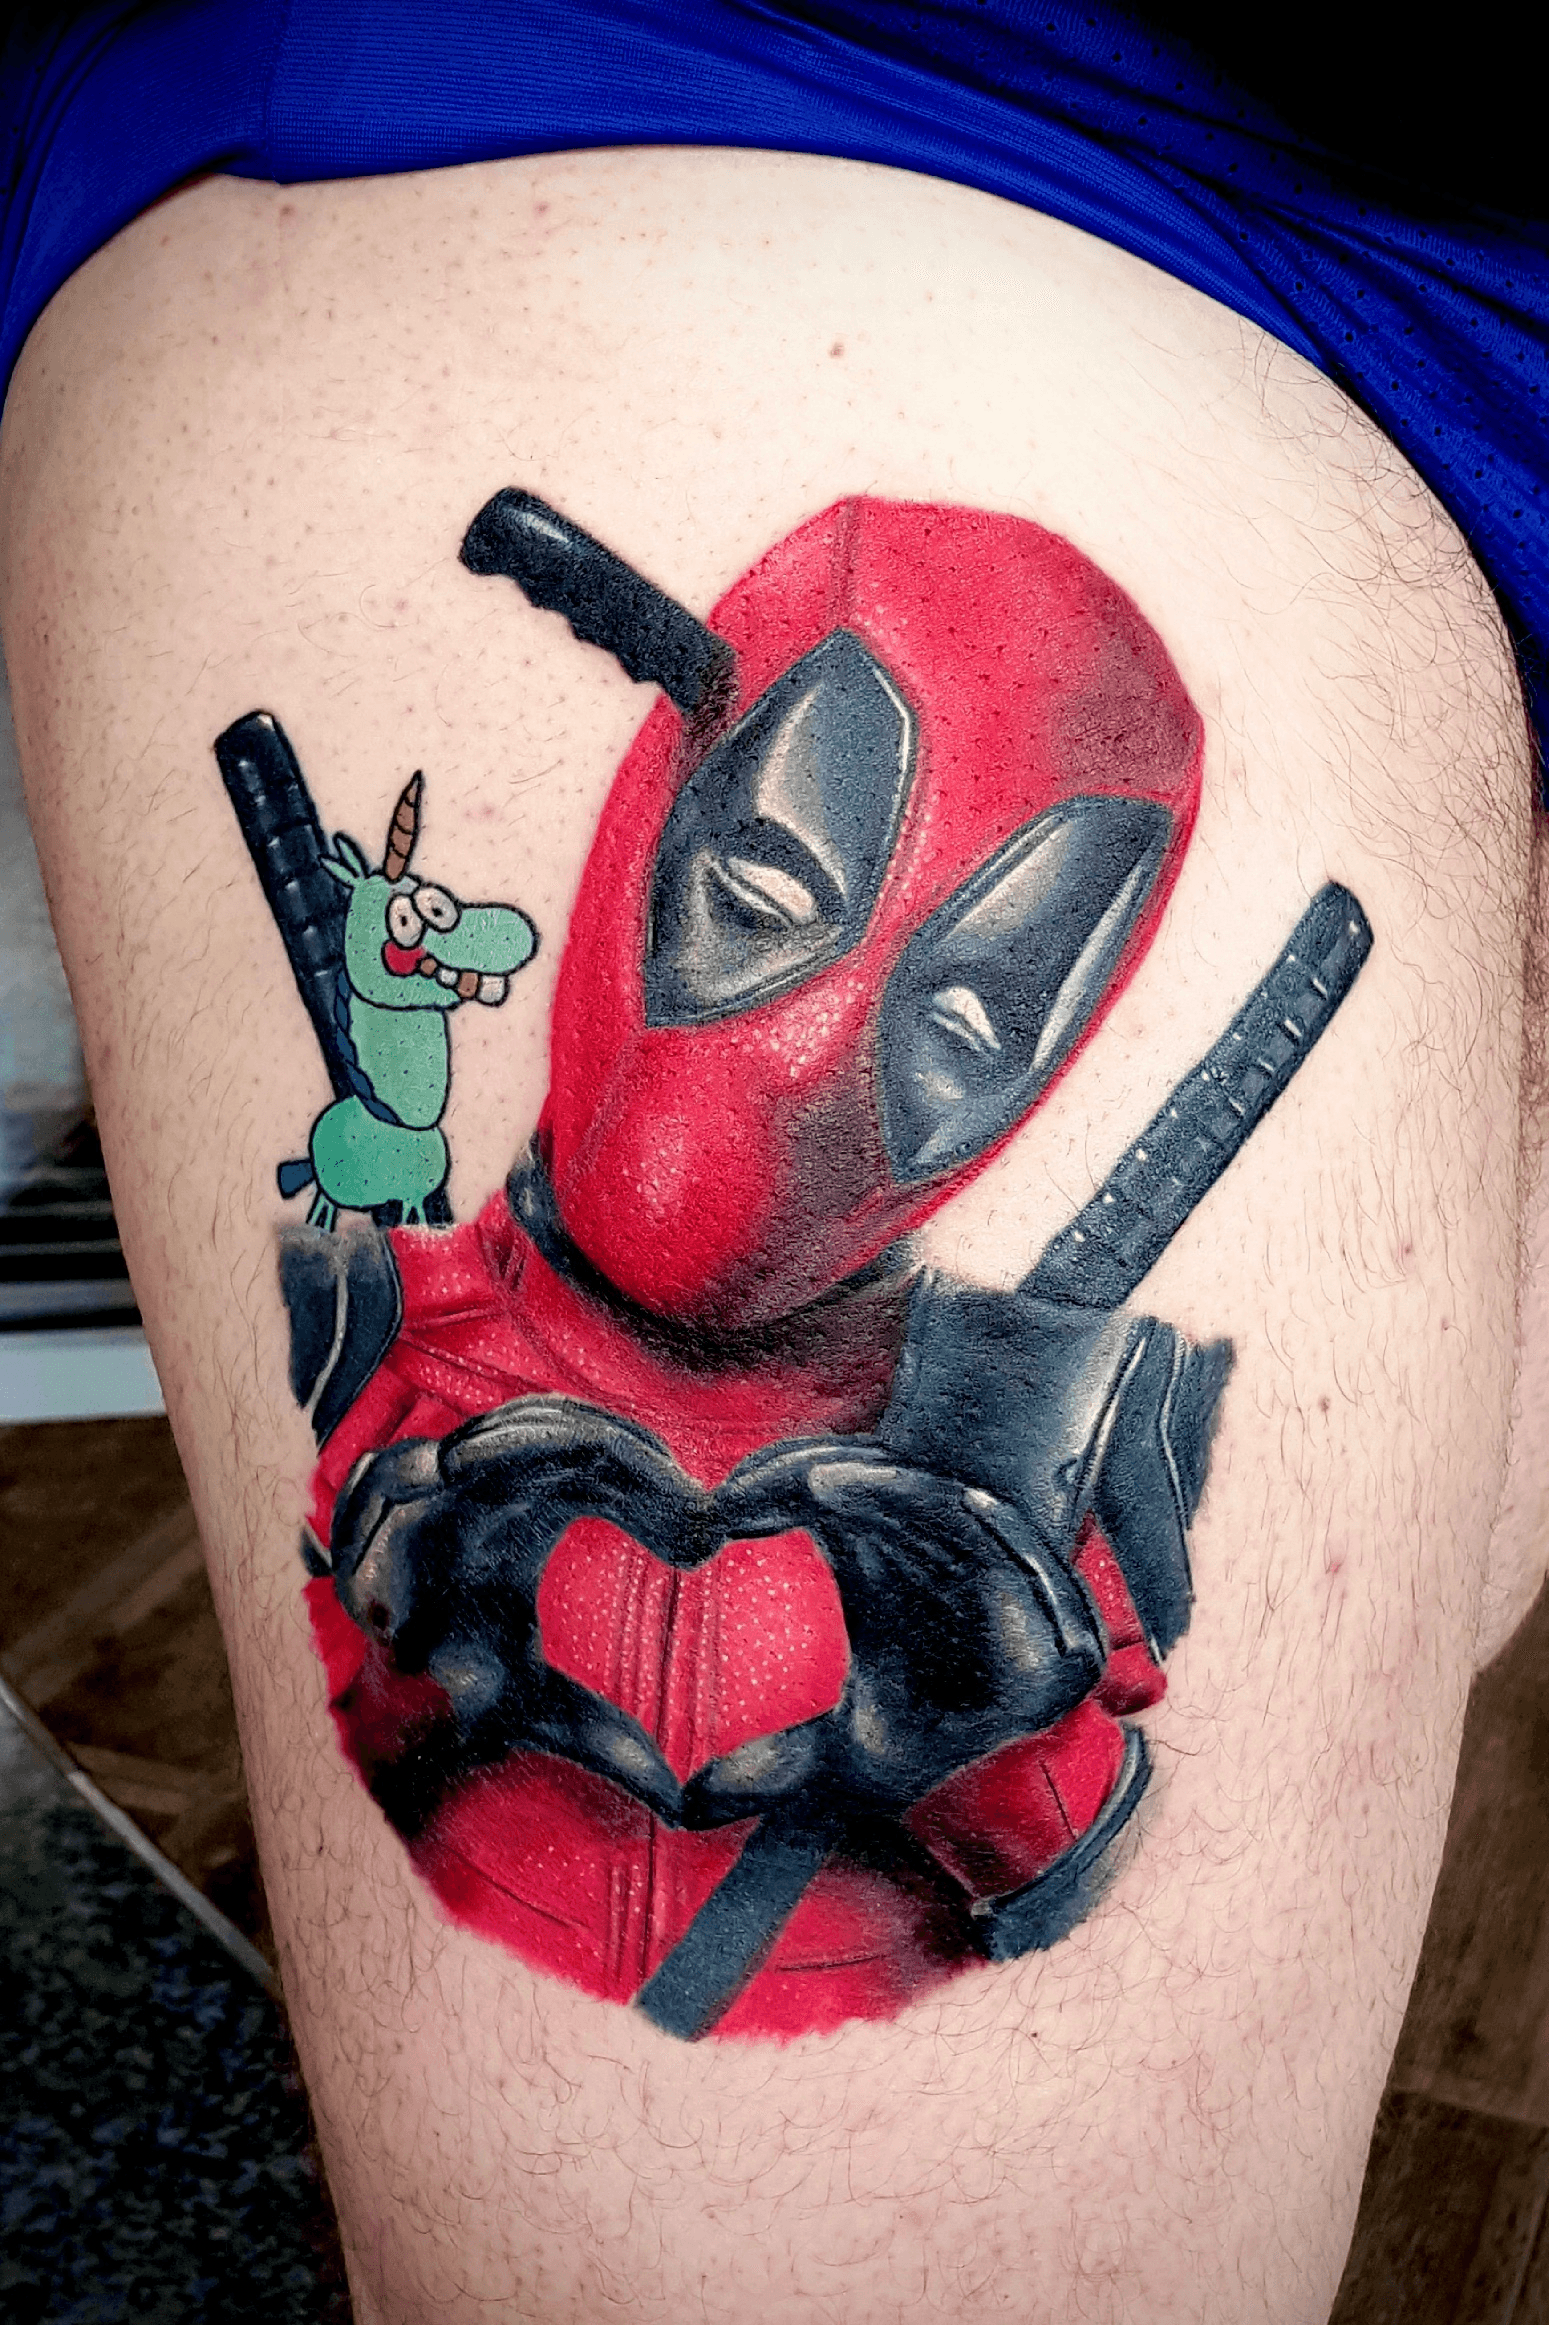 70 Dashing Deadpool Tattoo Designs  Redefining Deadpool with Ink